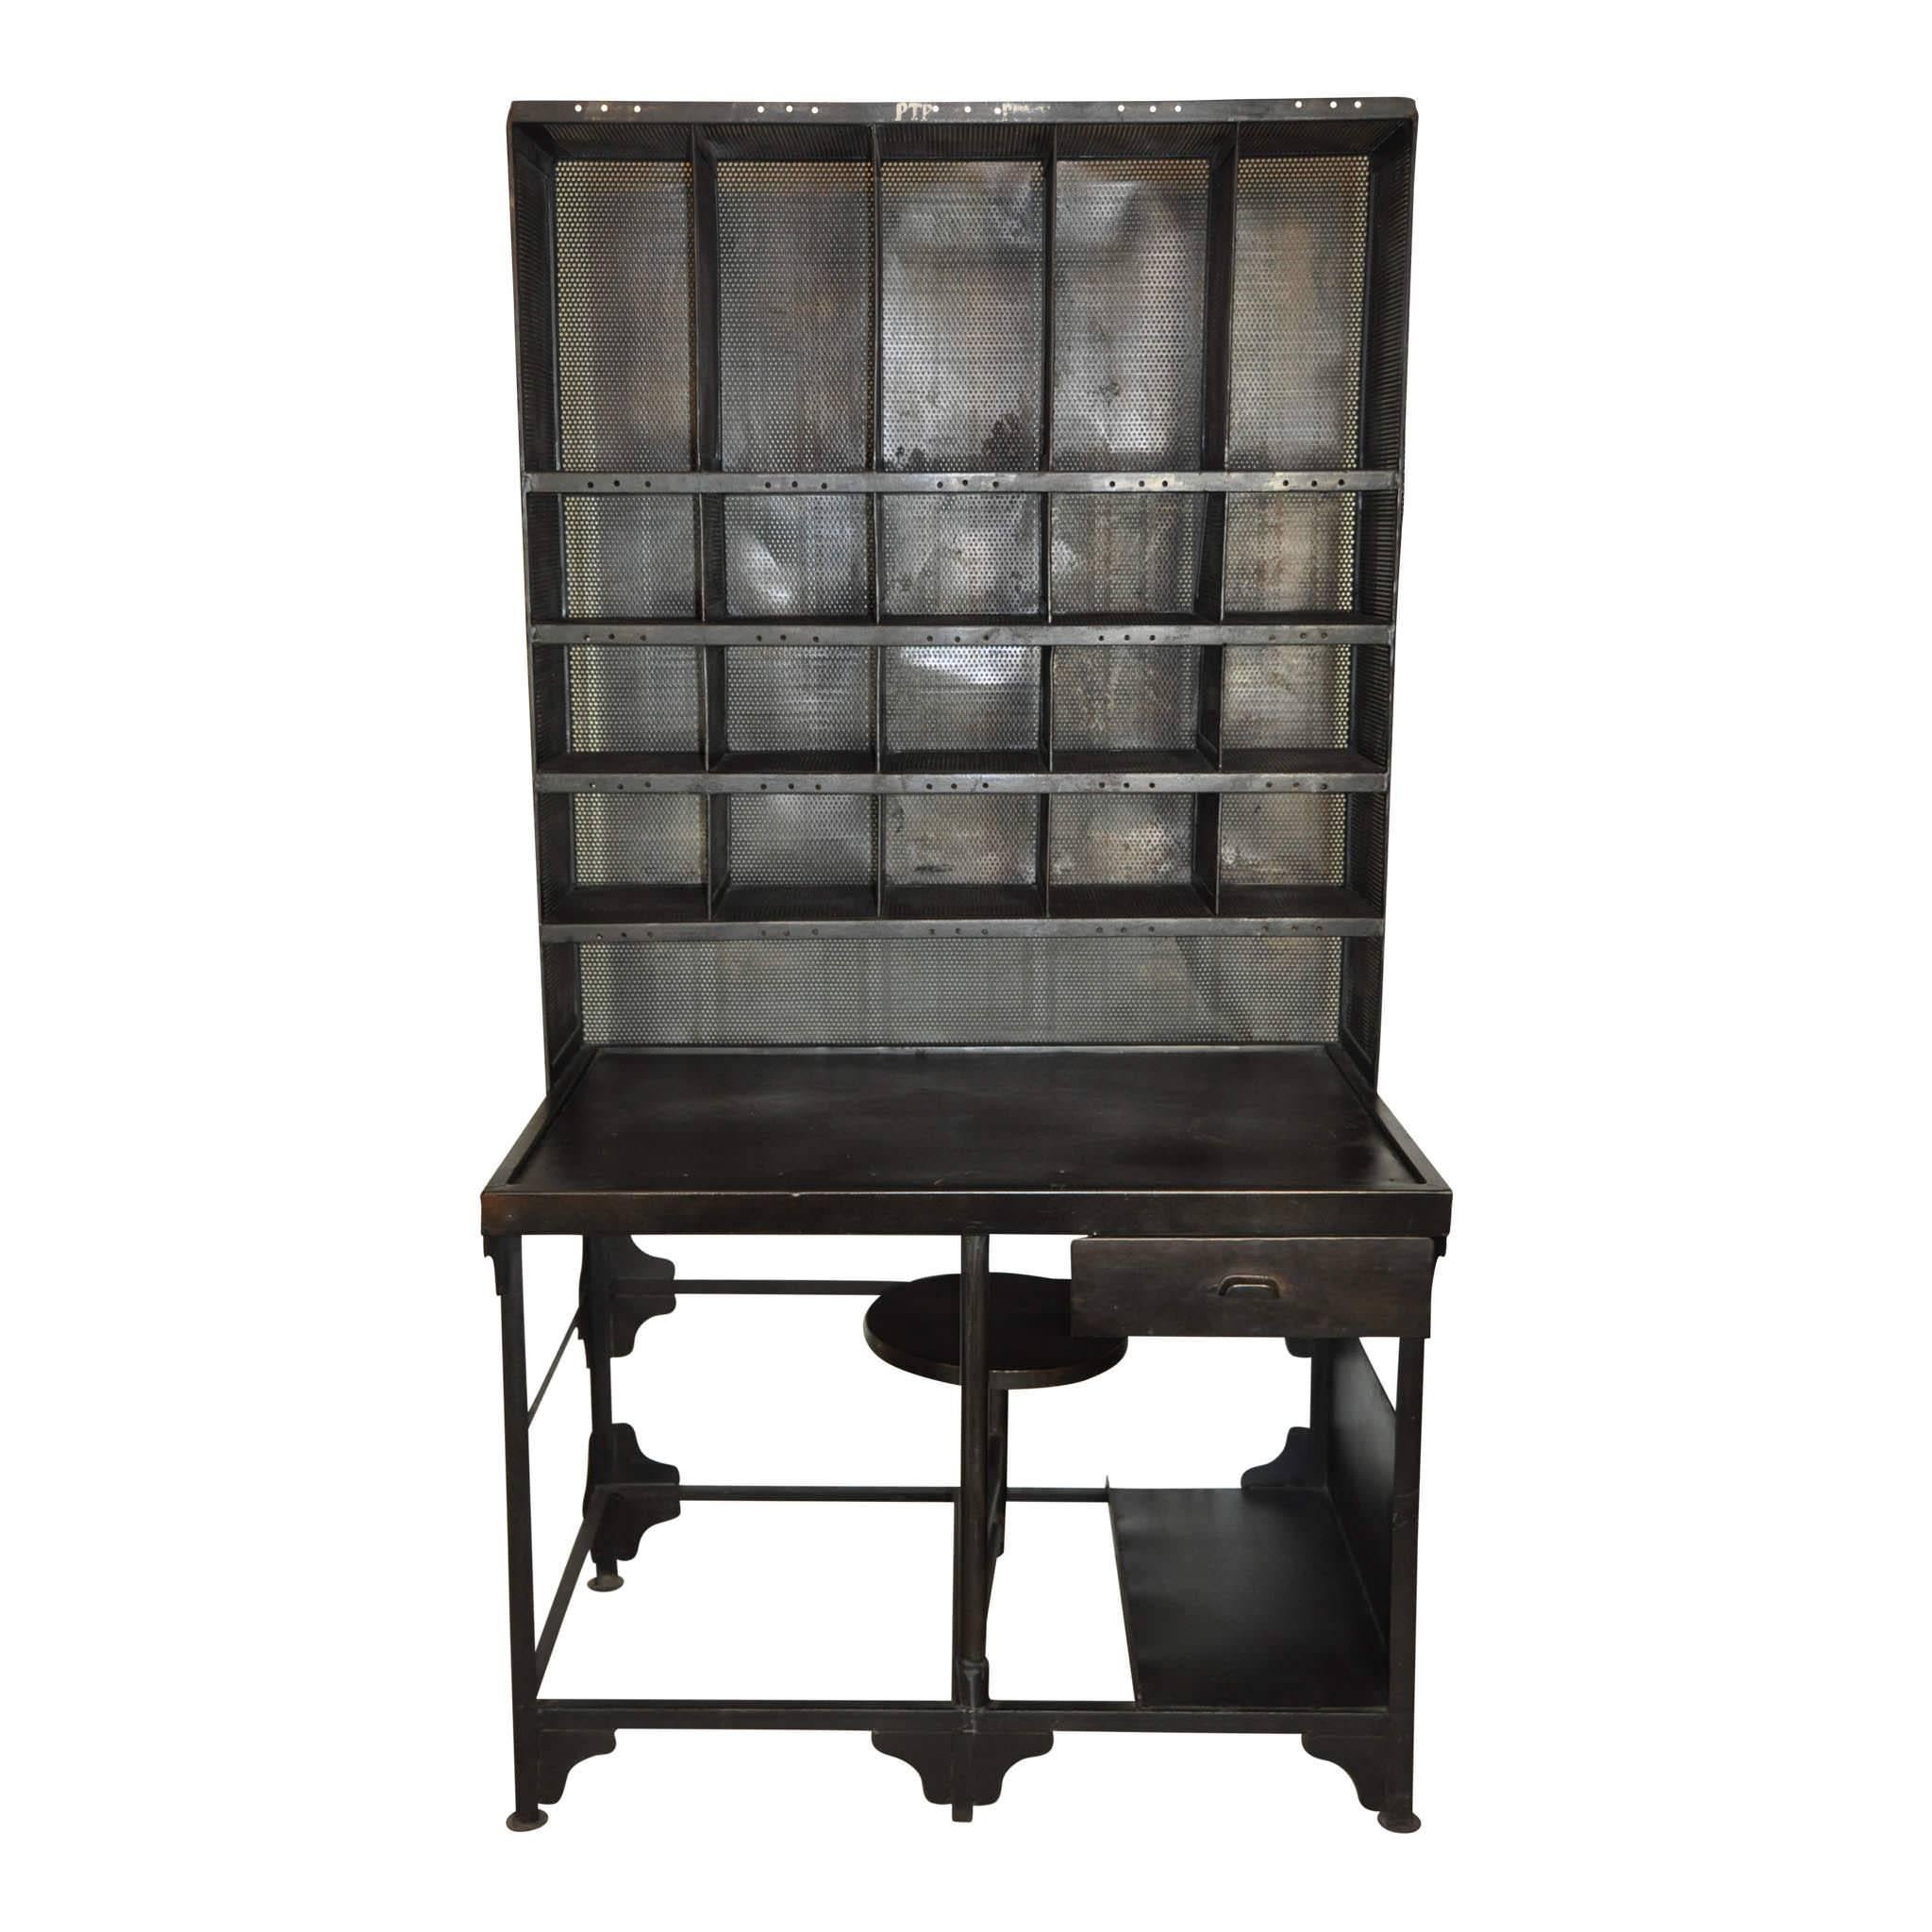 This steel postal desk features a 13 inch swivel seat, bracket leg bindings and 20 cubbies for storage. The height of the spacious desk top is 31 inches. Seat height is 19 inches.